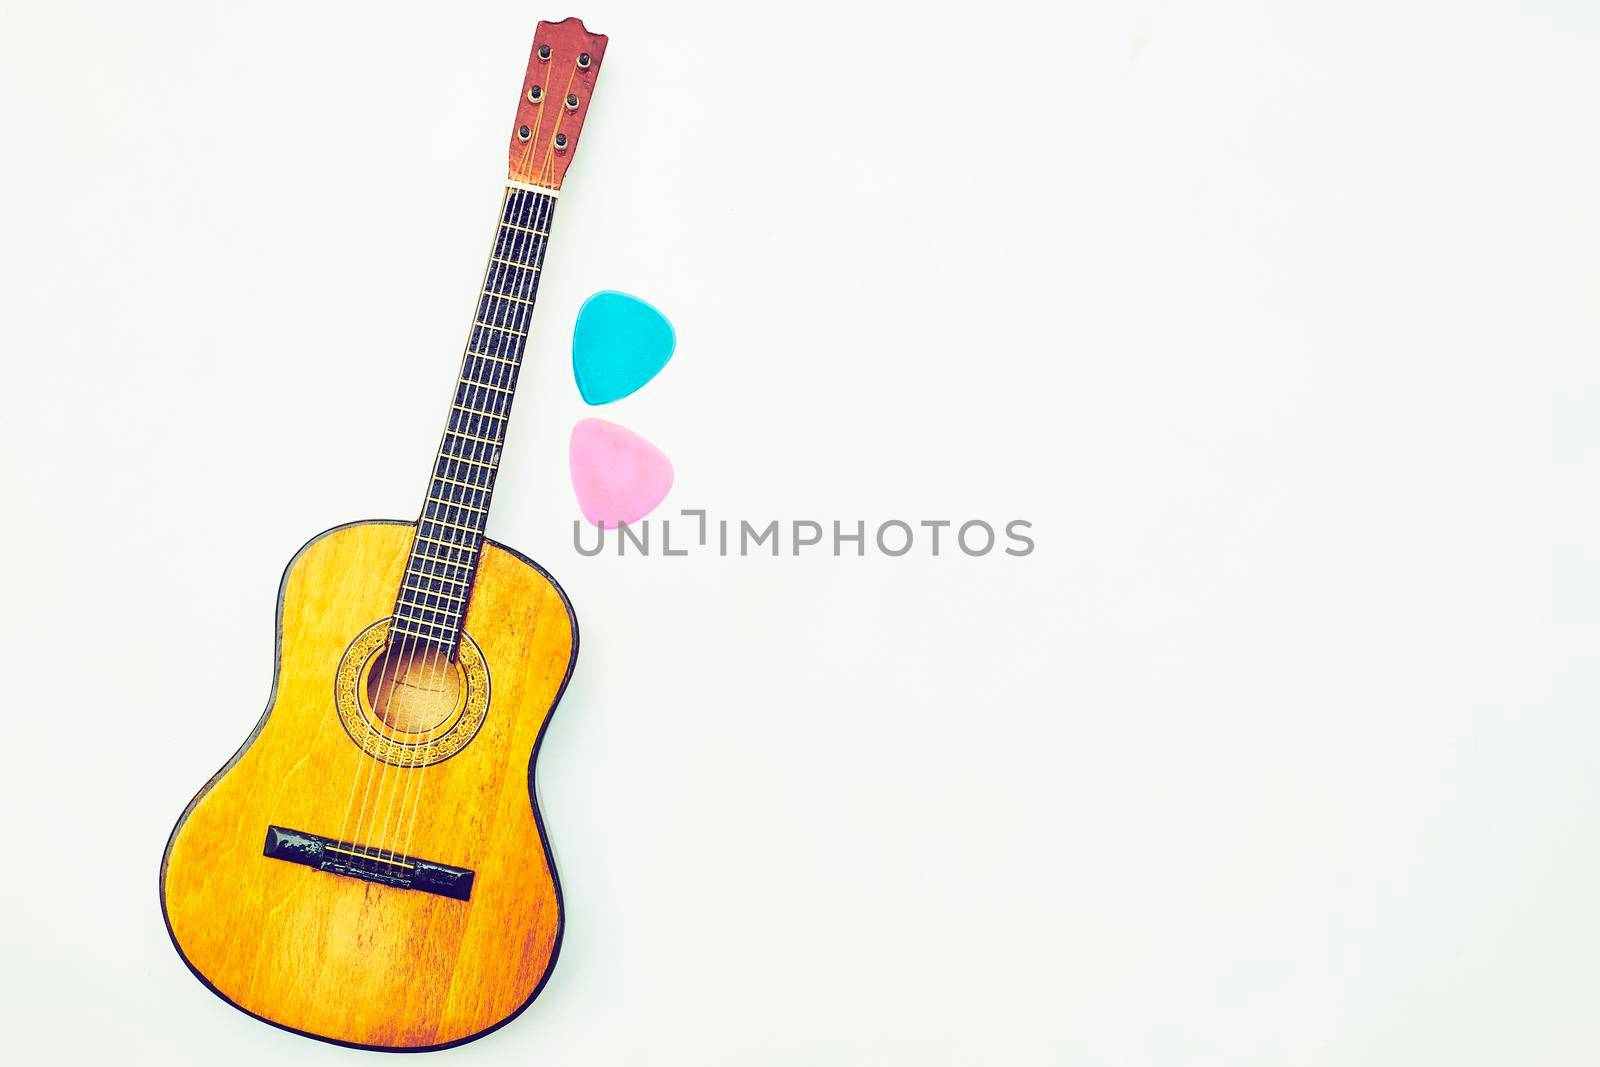 a stringed musical instrument, with a fretted fingerboard, typically incurved sides, and six or twelve strings, played by plucking or strumming with the fingers or a plectrum.